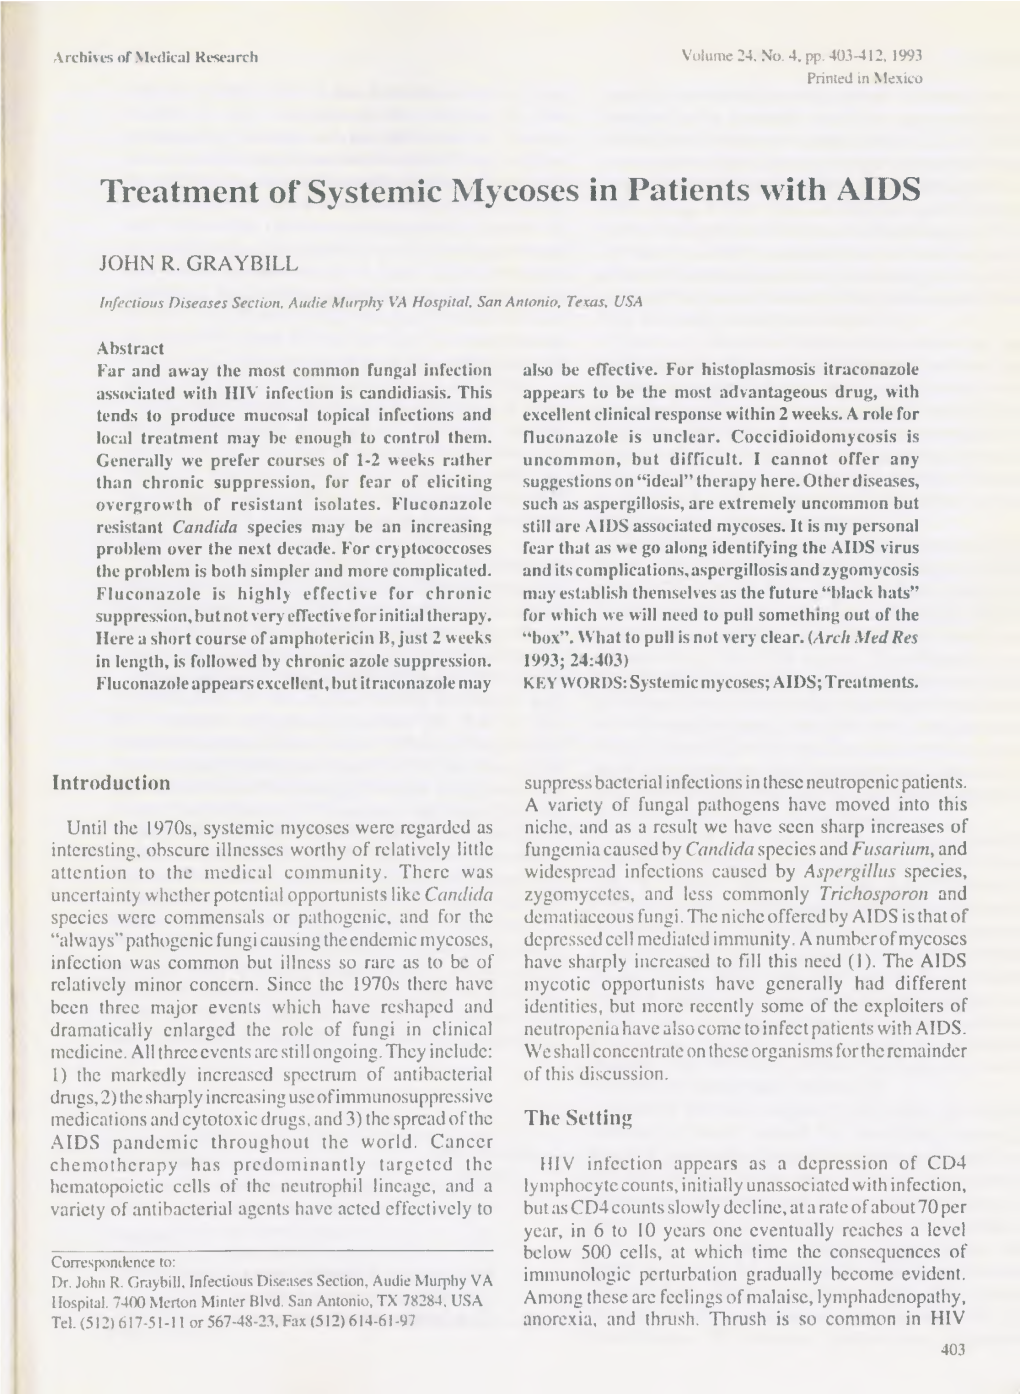 Treatment of Systemic Mycoses in Patients with AIDS